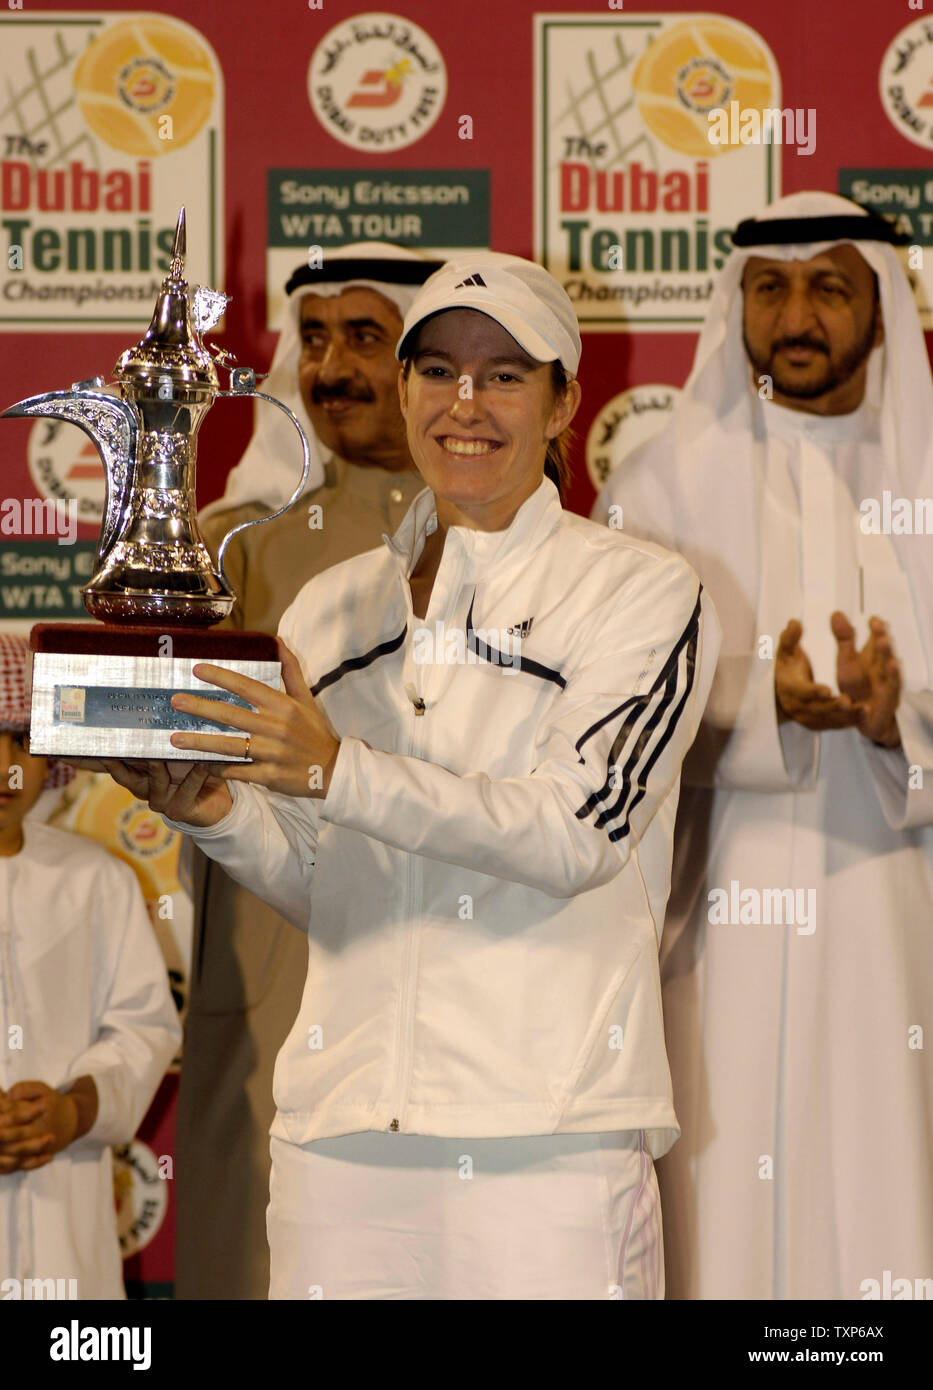 Justine Henin-Hardenne of Belgium seen with trophy after defeating Maria  Sharpova of Russia 7-5, 6-2 in the finals of the Dubai Tennis Championships  in Dubai, United Arab Emirates on February 25, 2006.